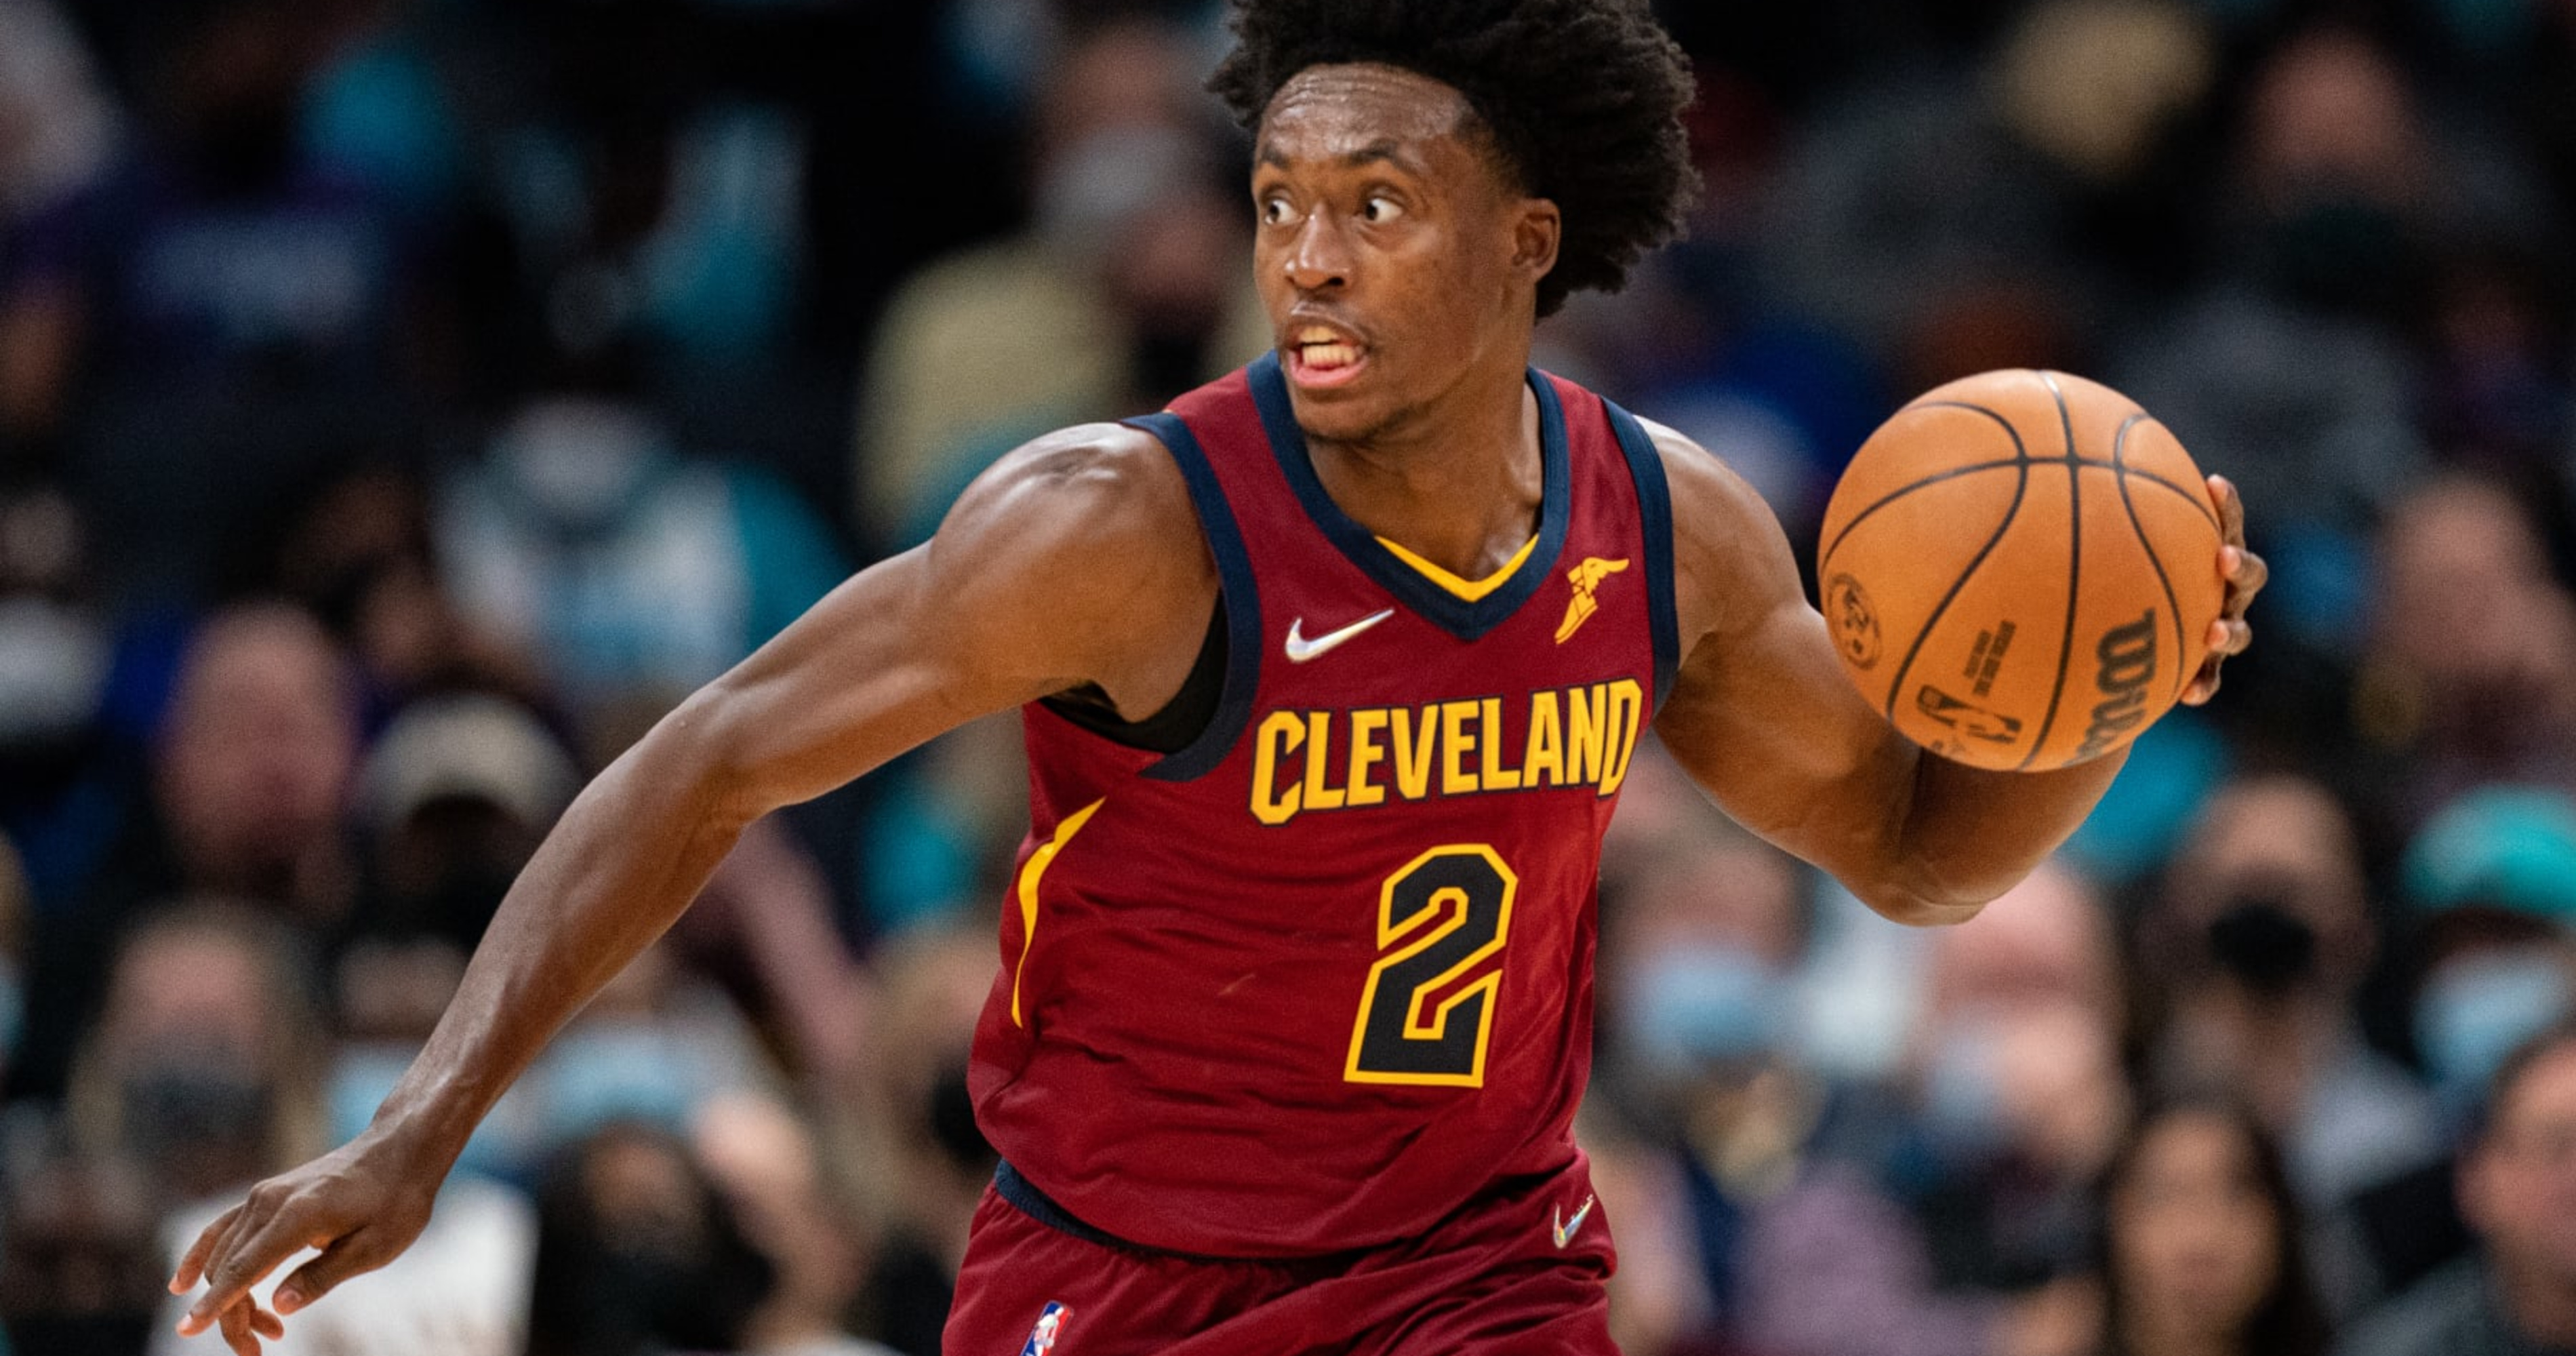 Collin Sexton has Huge Night for Cavaliers